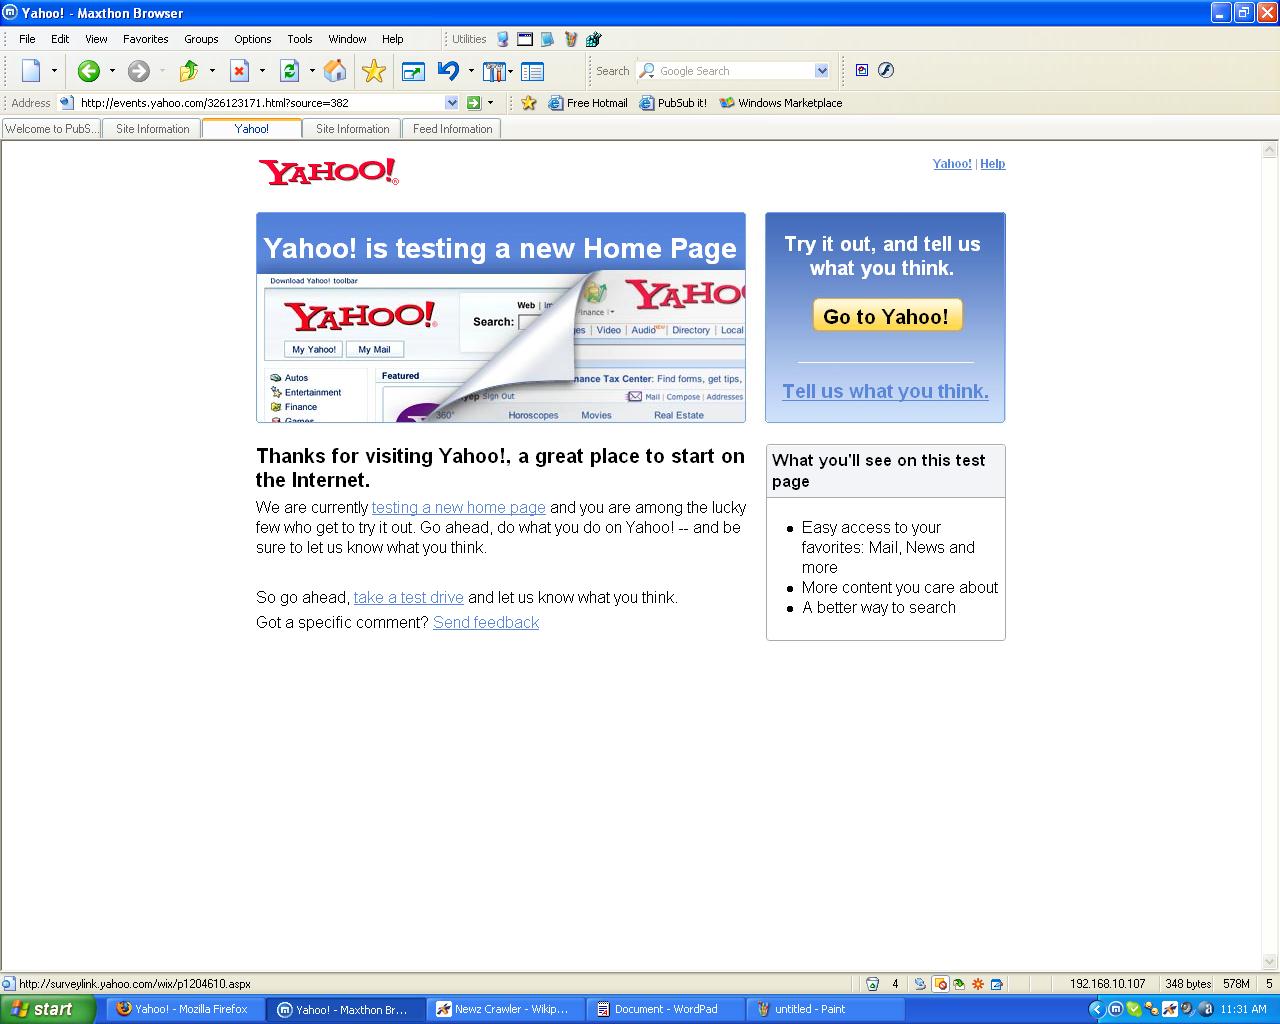 Redesigned Yahoo homepage with a before and after comparison.